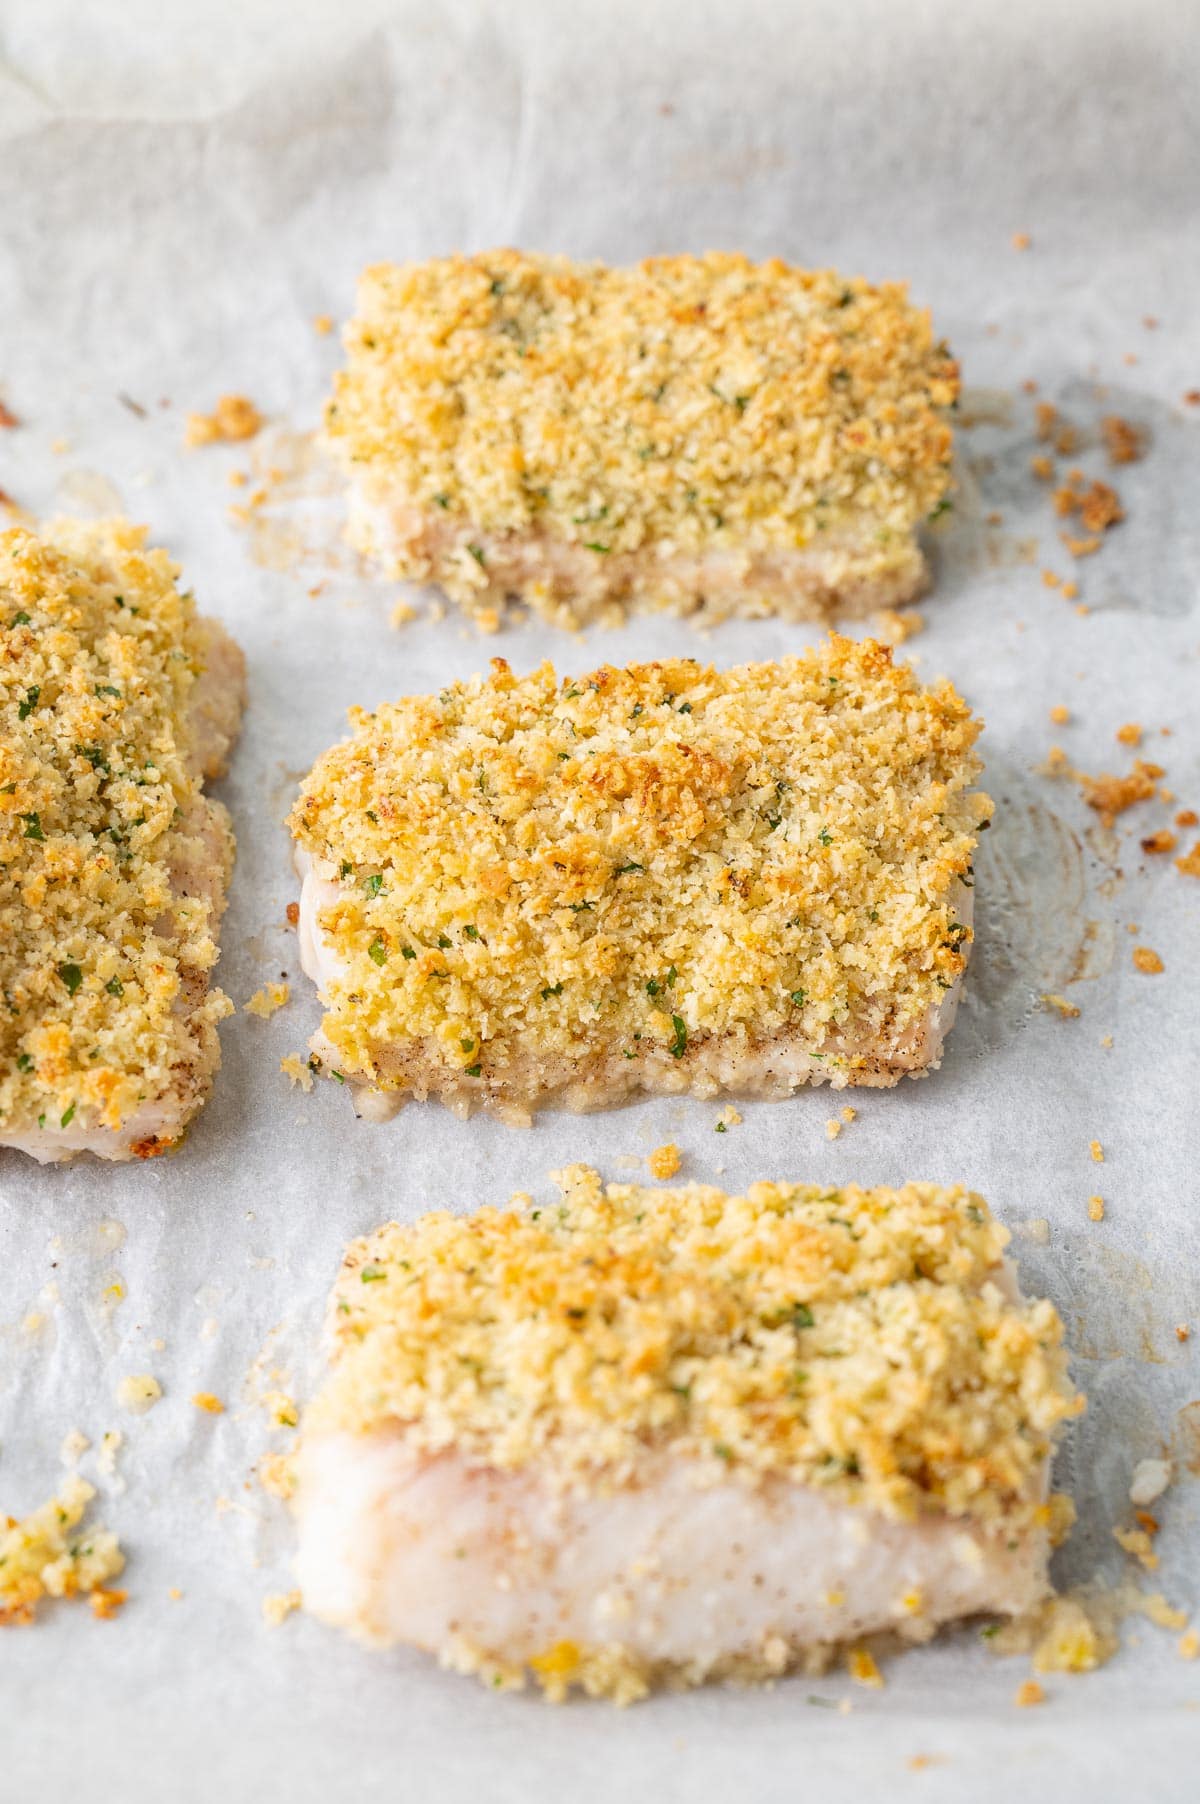 Baked Panko Crusted Cod Fish